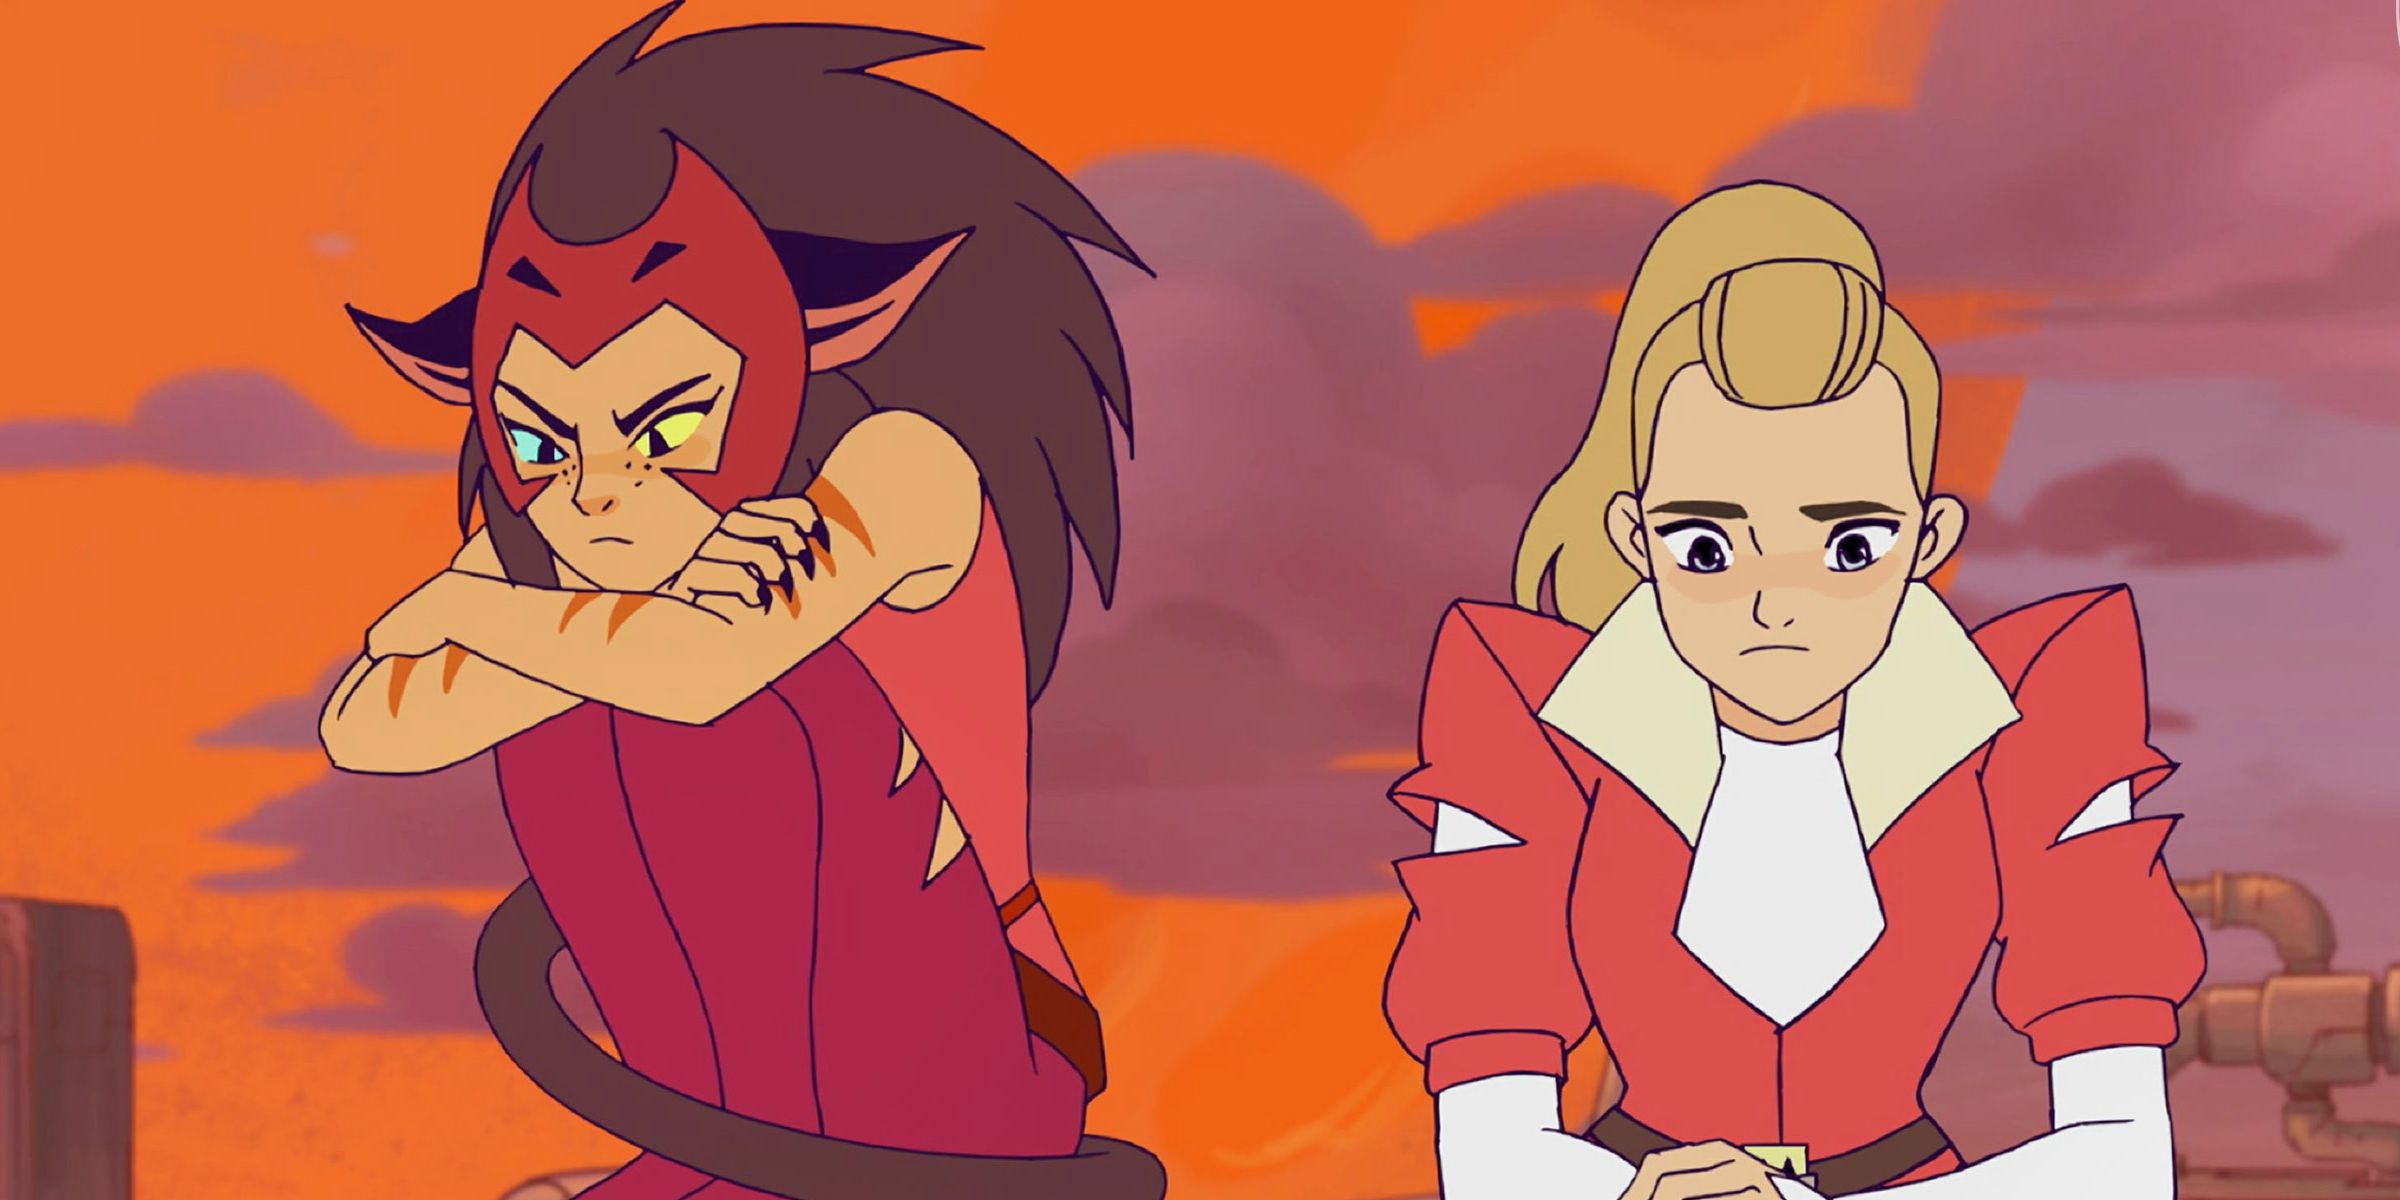 SheRa 10 Unanswered Questions We Have About The Show